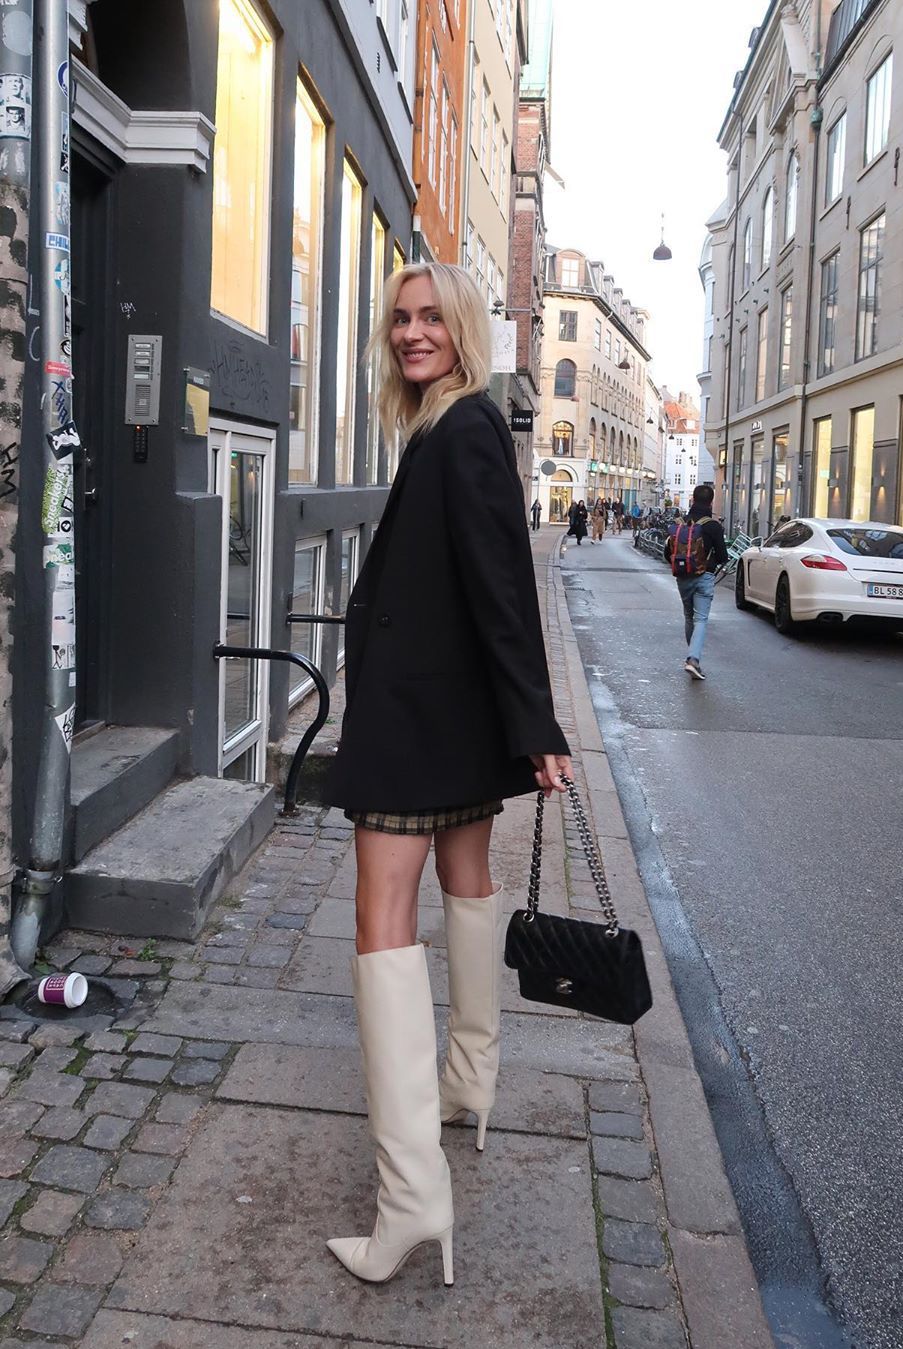 20 Ways To Wear An Oversized Blazer If You Love Short Skirts And Dresses Outfitting Ideas